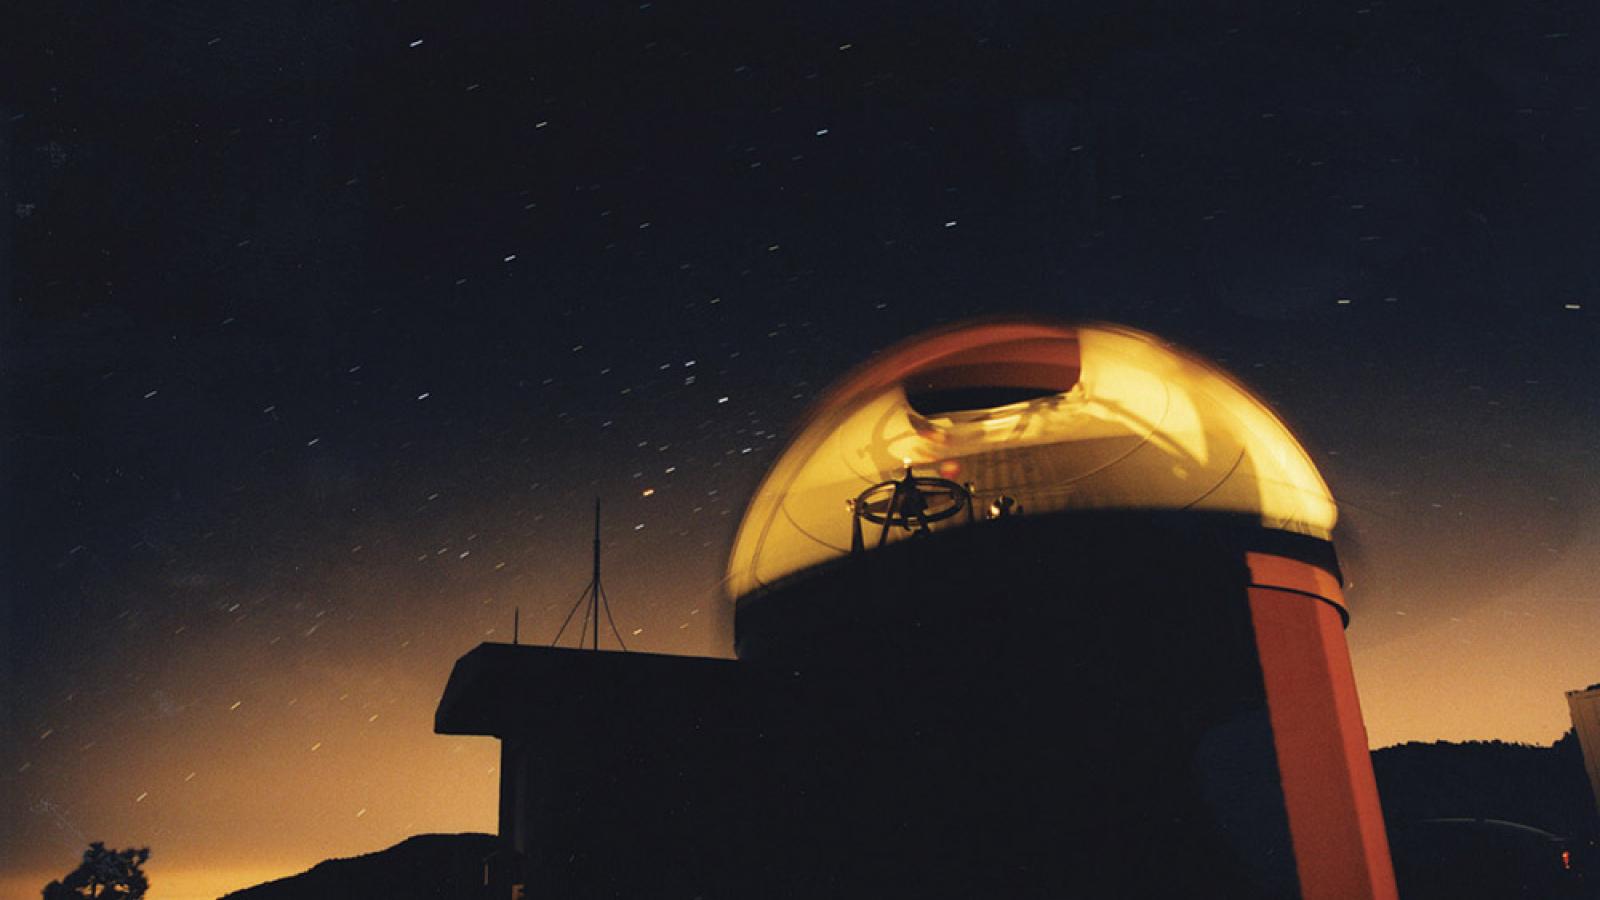 Table Mountain Observatory with Pomona’s 1-meter telescope